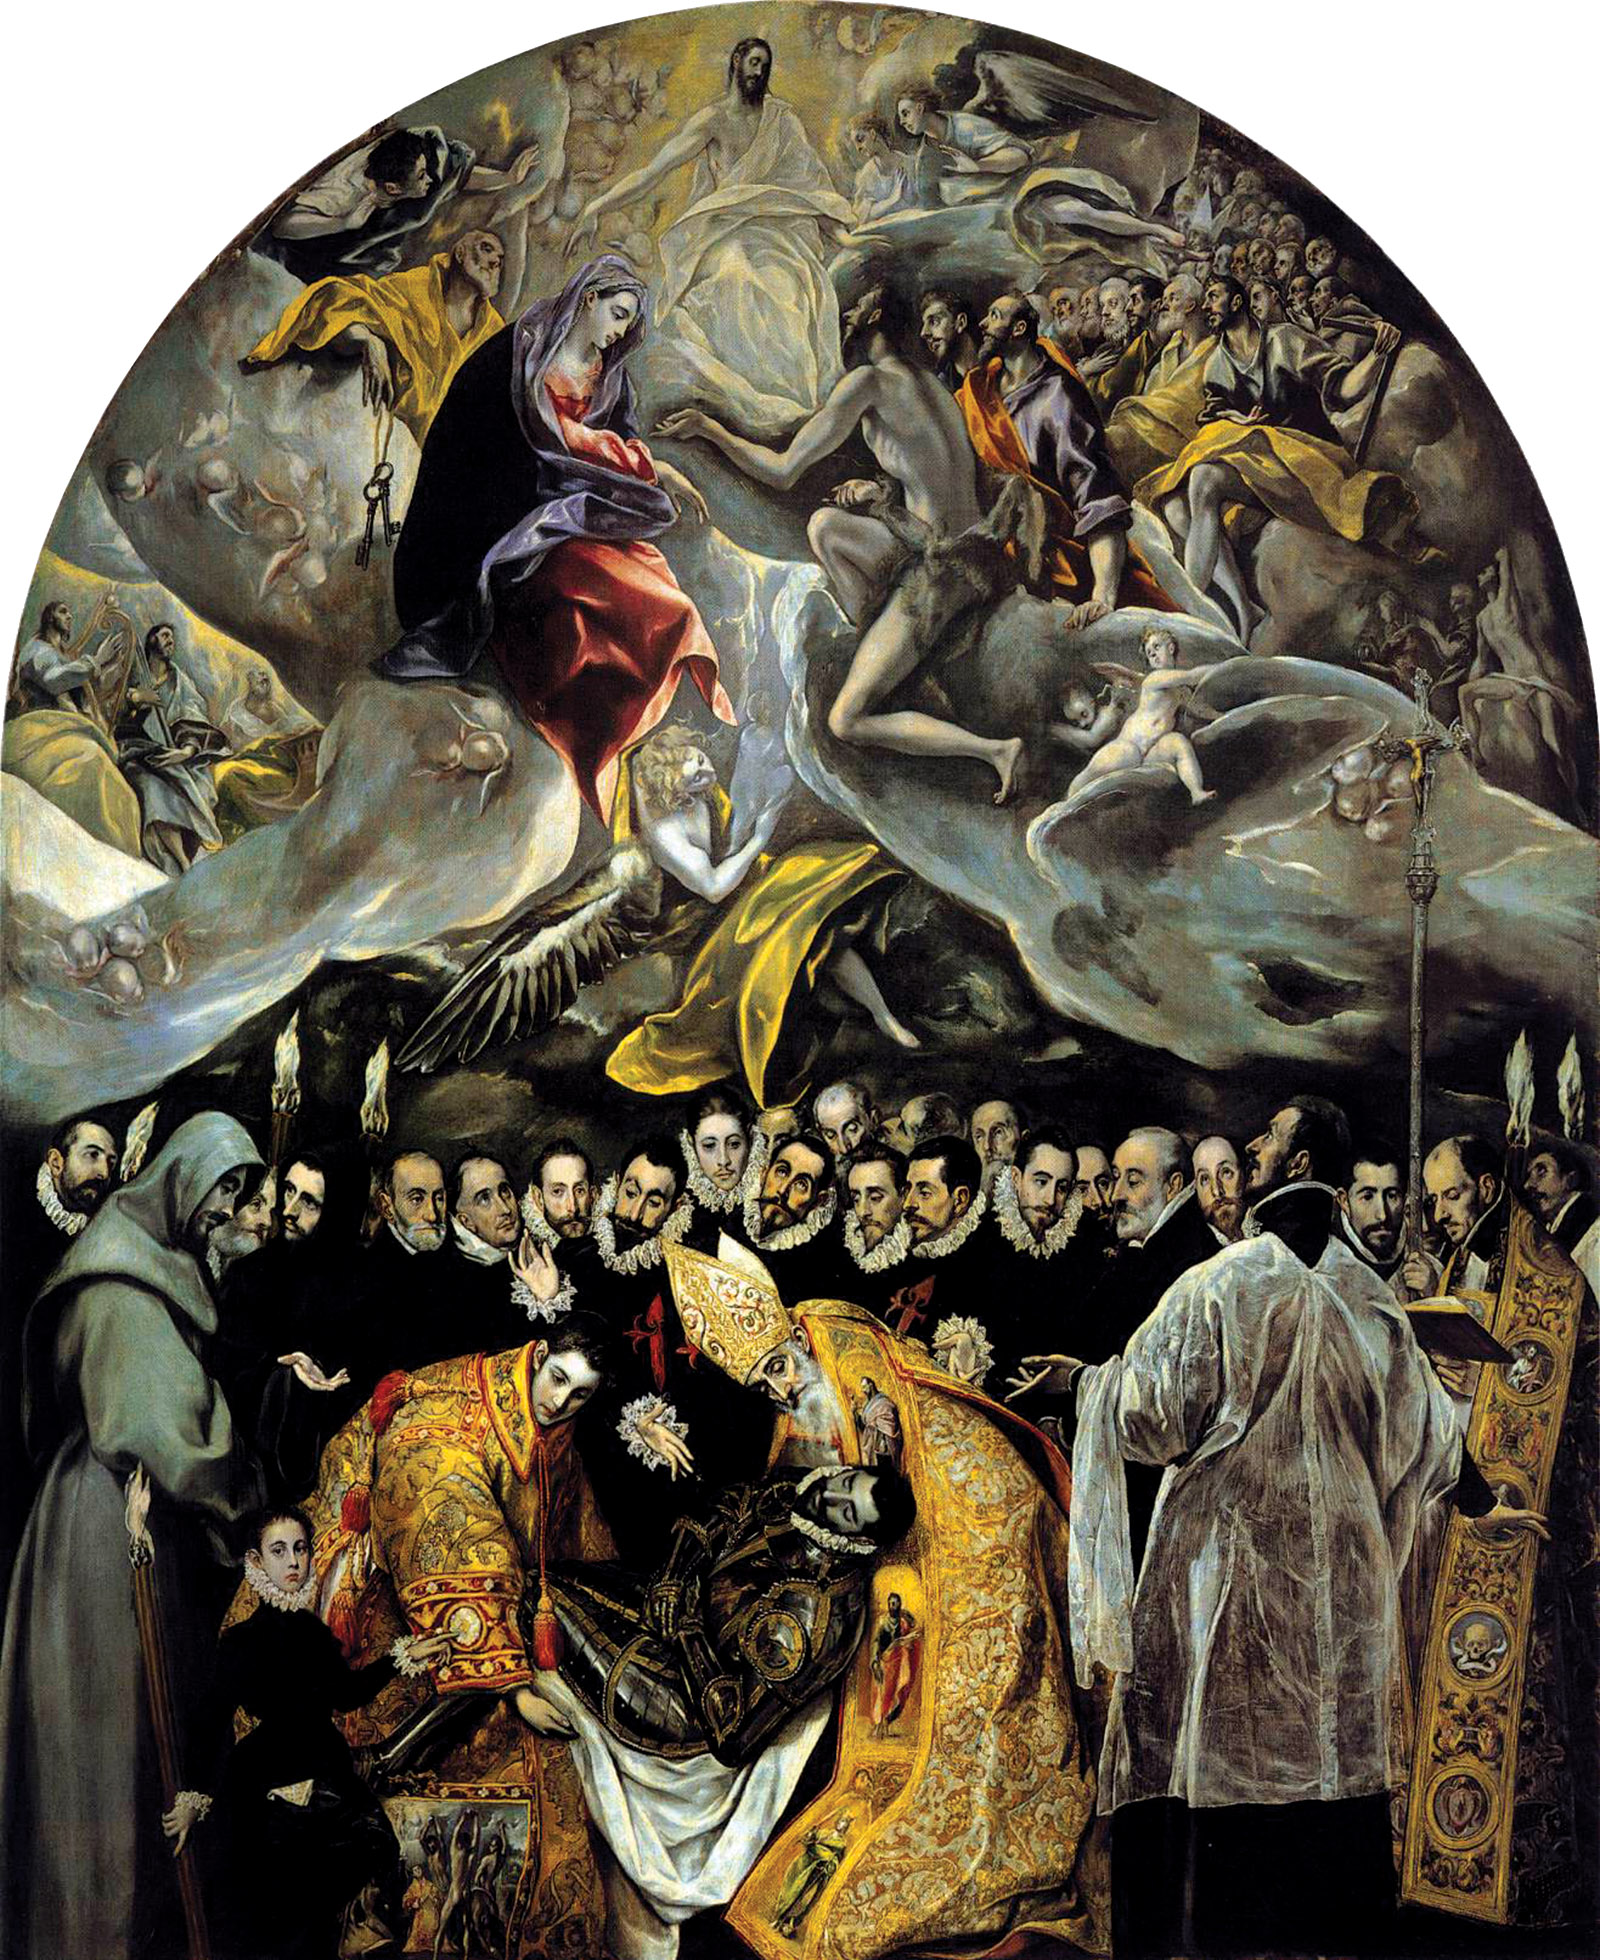 The Burial of the Count of Orgaz; painting by El Greco